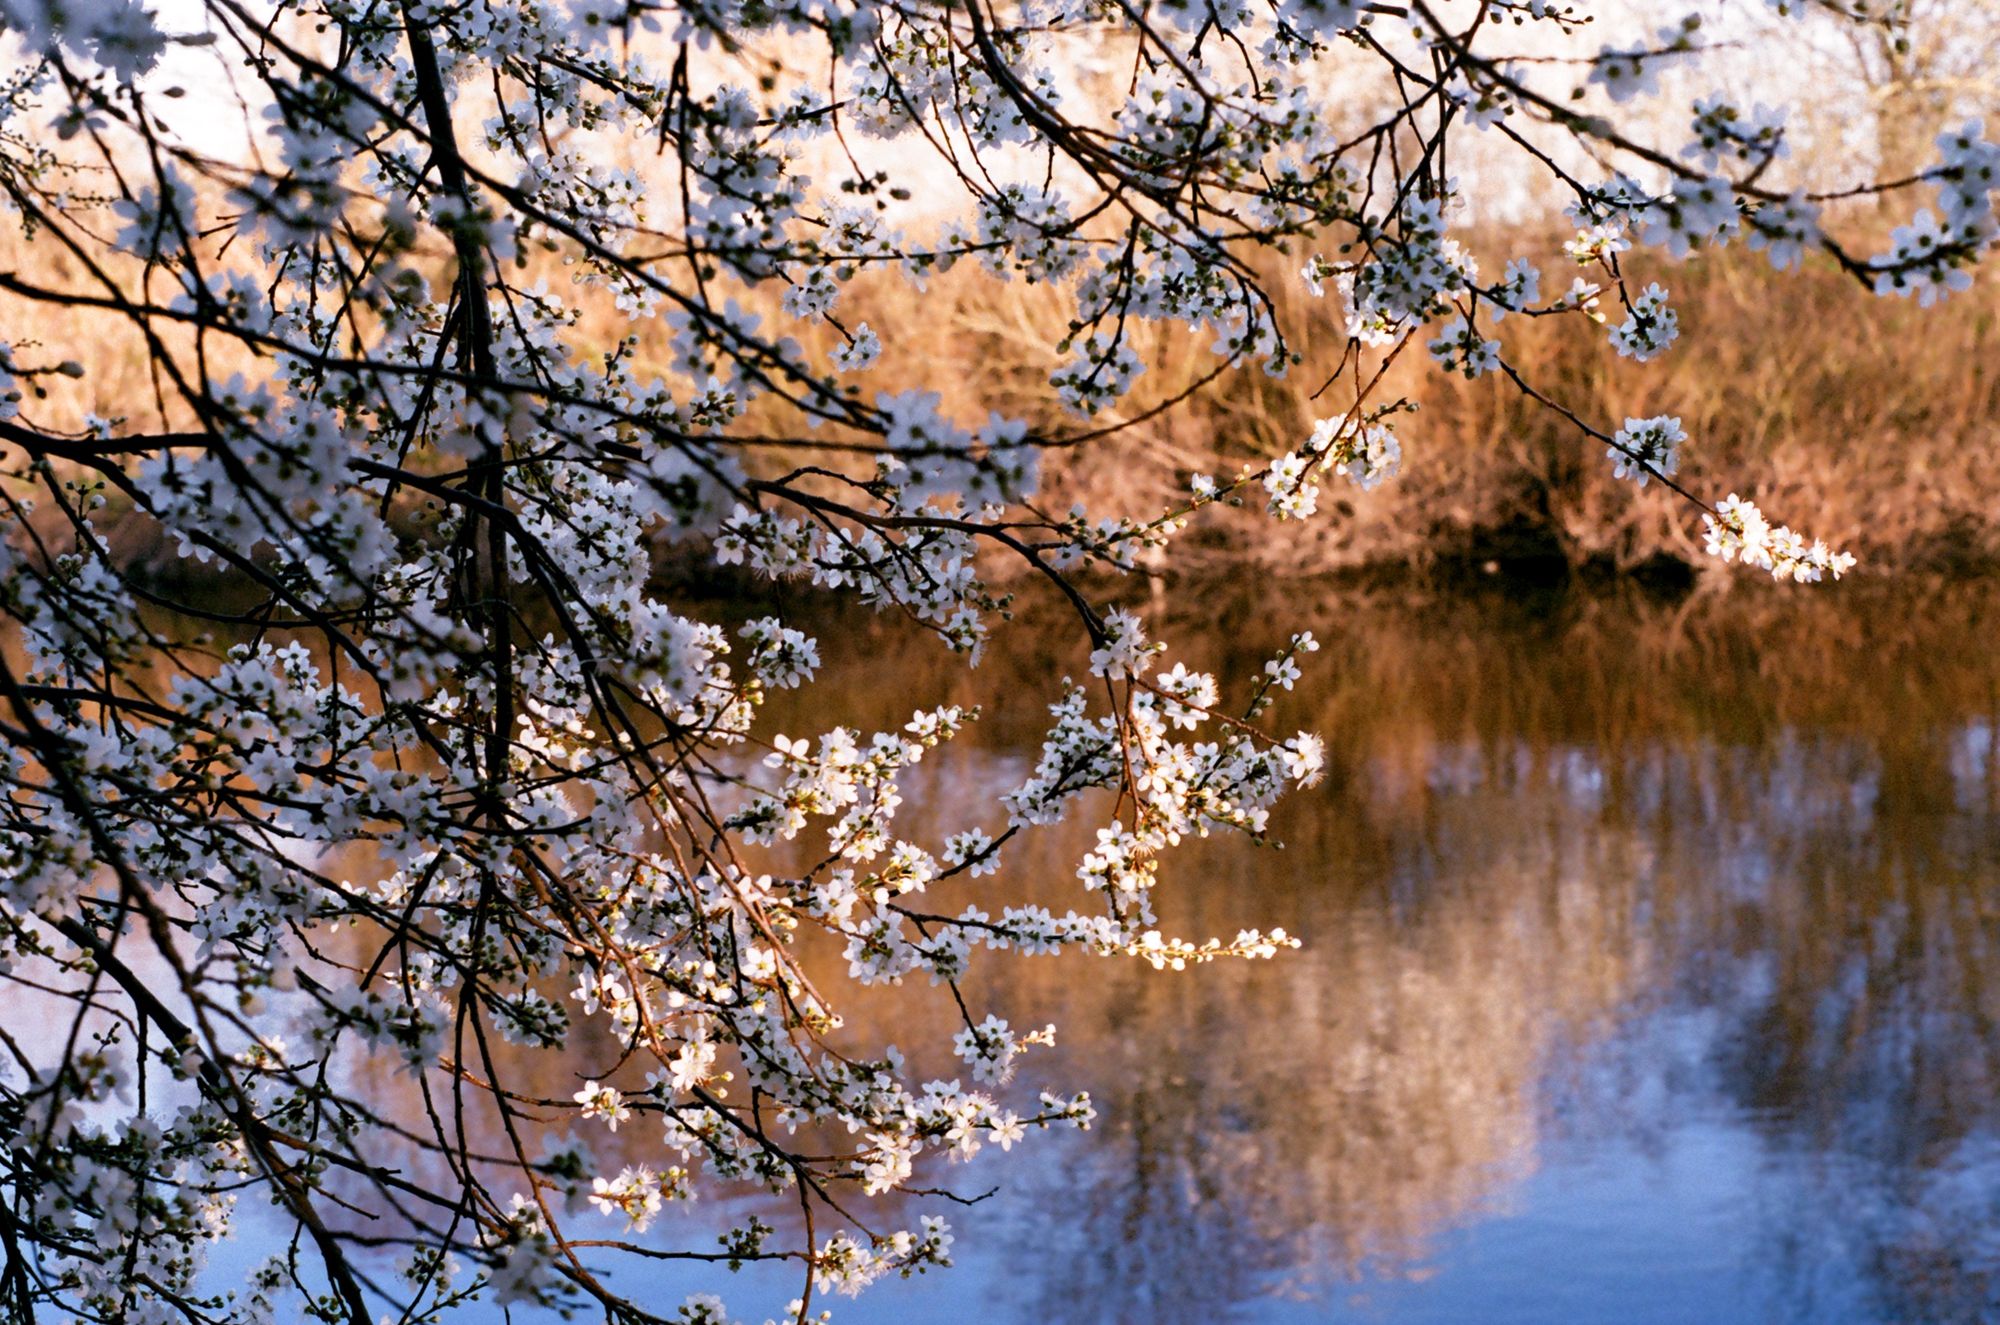 A tree with white blossom on its otherwise bare branches hangs in front of a river on a blue, sunny day, with the opposite bank (reflected in the water) being golden-brown, bare vegetation. The flowers are lit from behind and seem to sparkle.